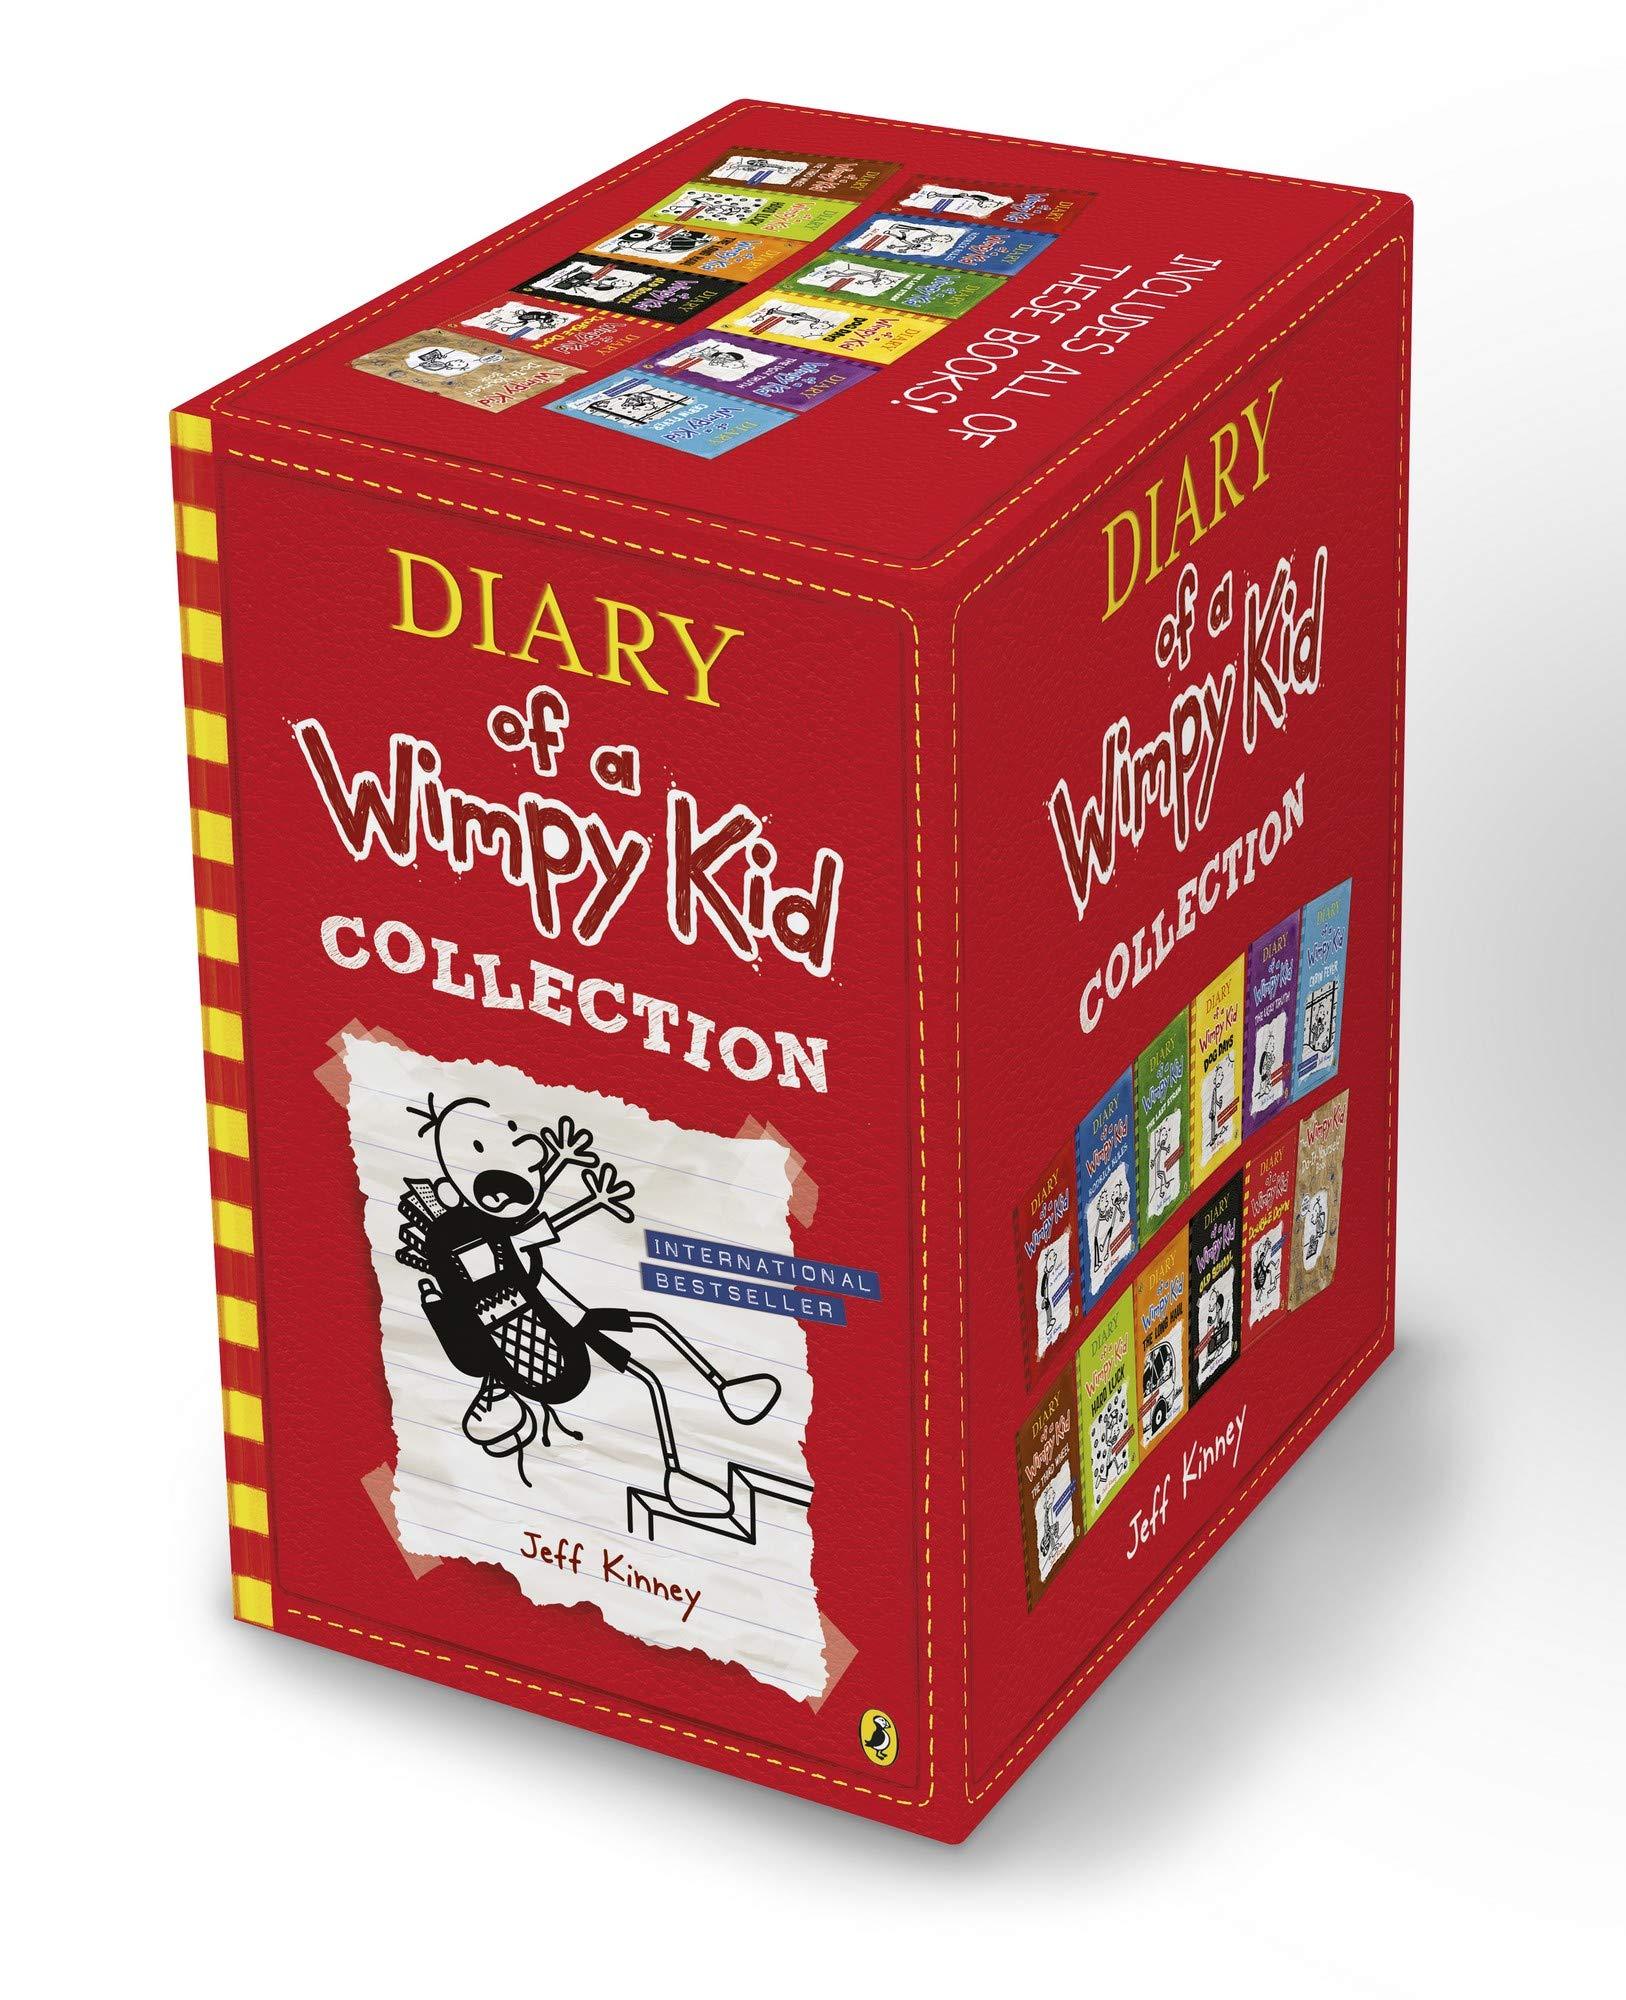 Diary of a Wimpy Kid ~ Box Set